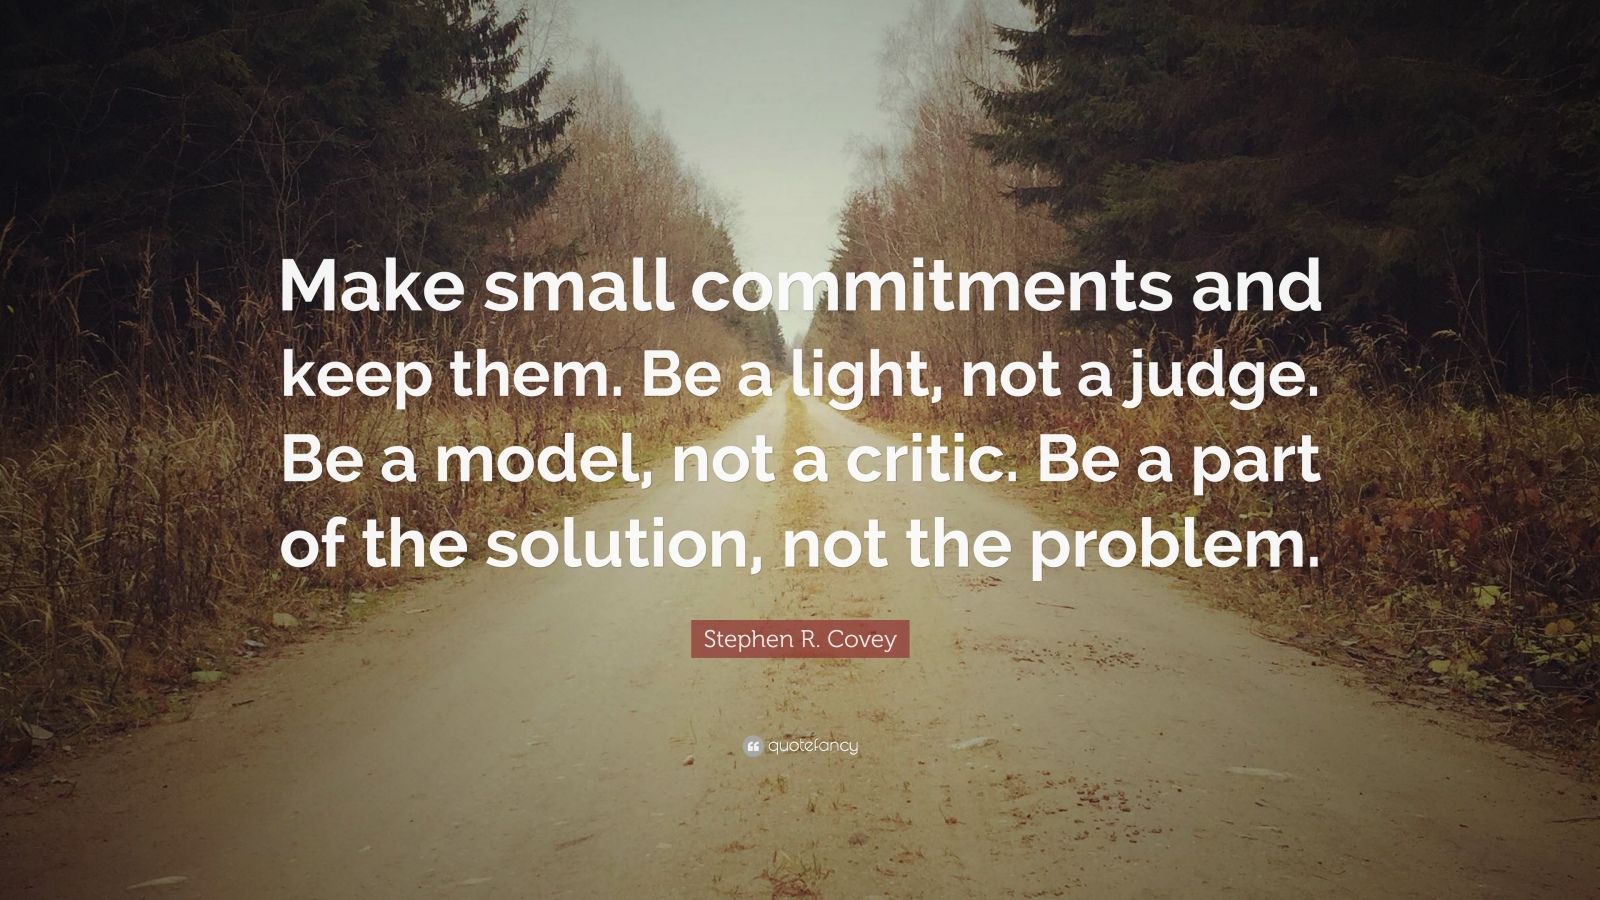 Stephen R. Covey Quote: “Make small commitments and keep them. Be a